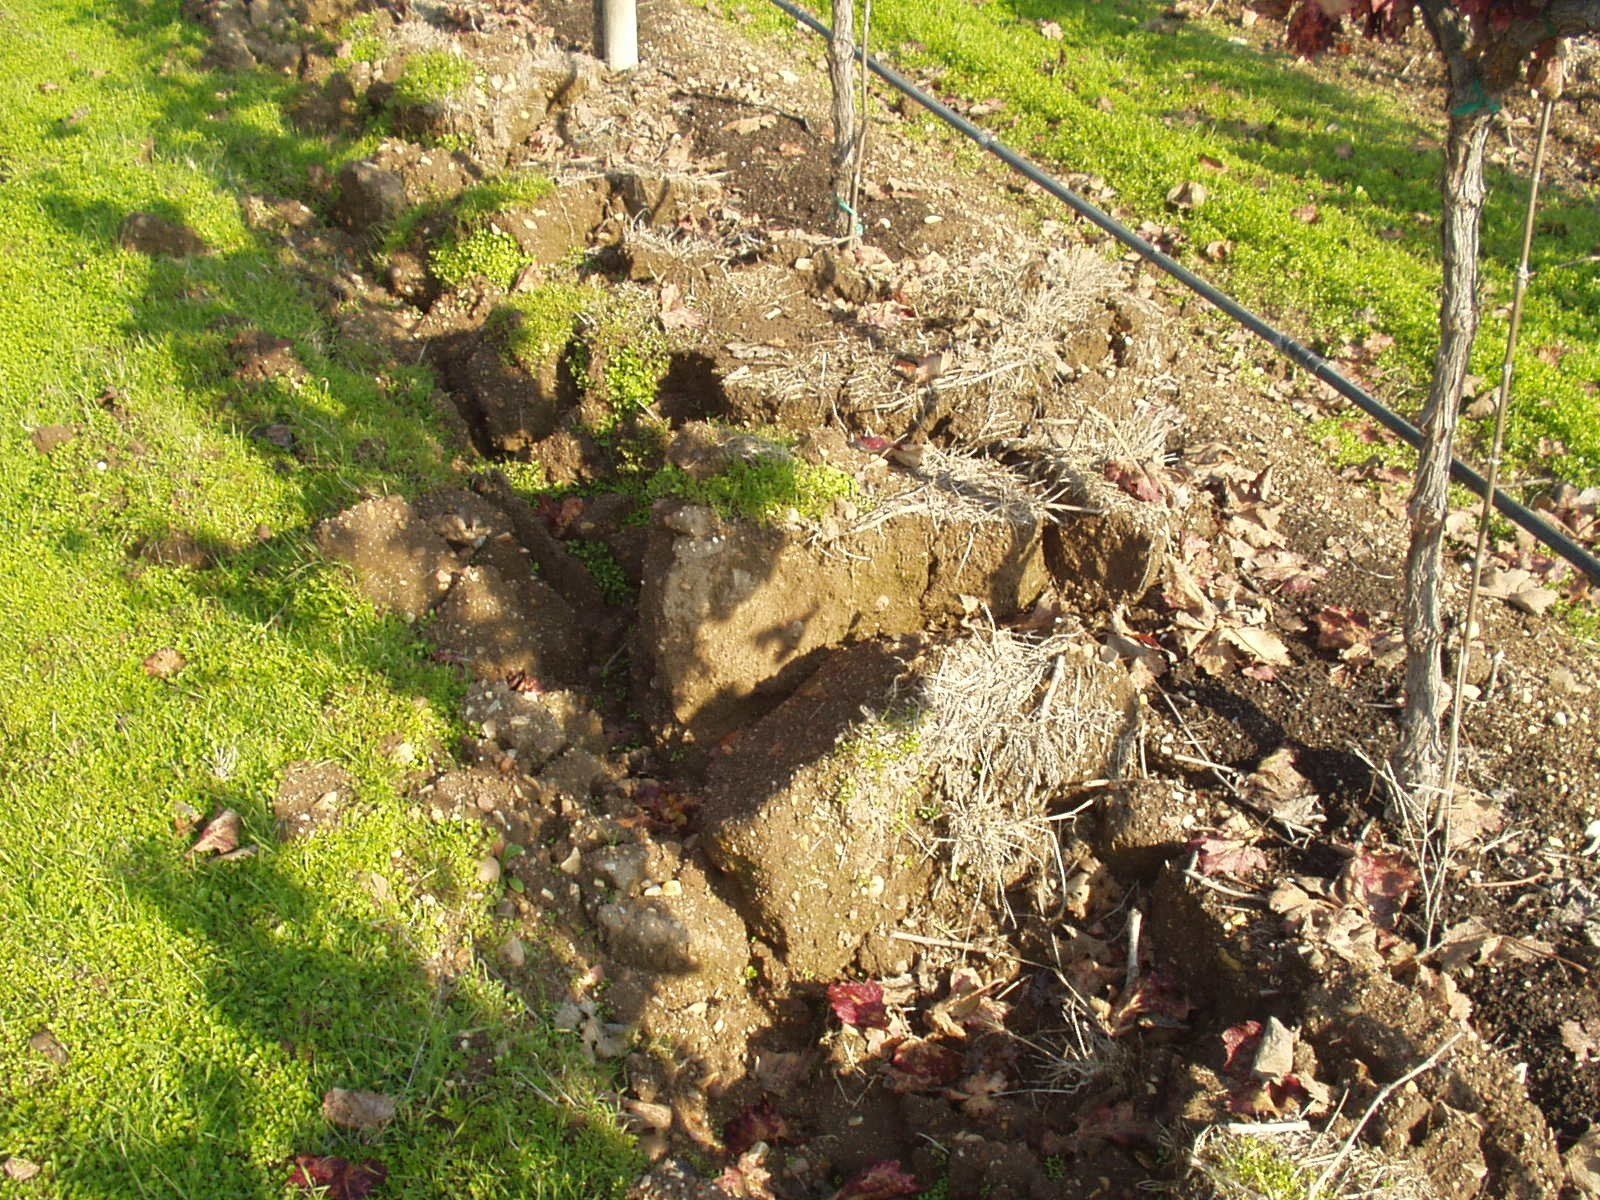 Soil compaction in viticulture